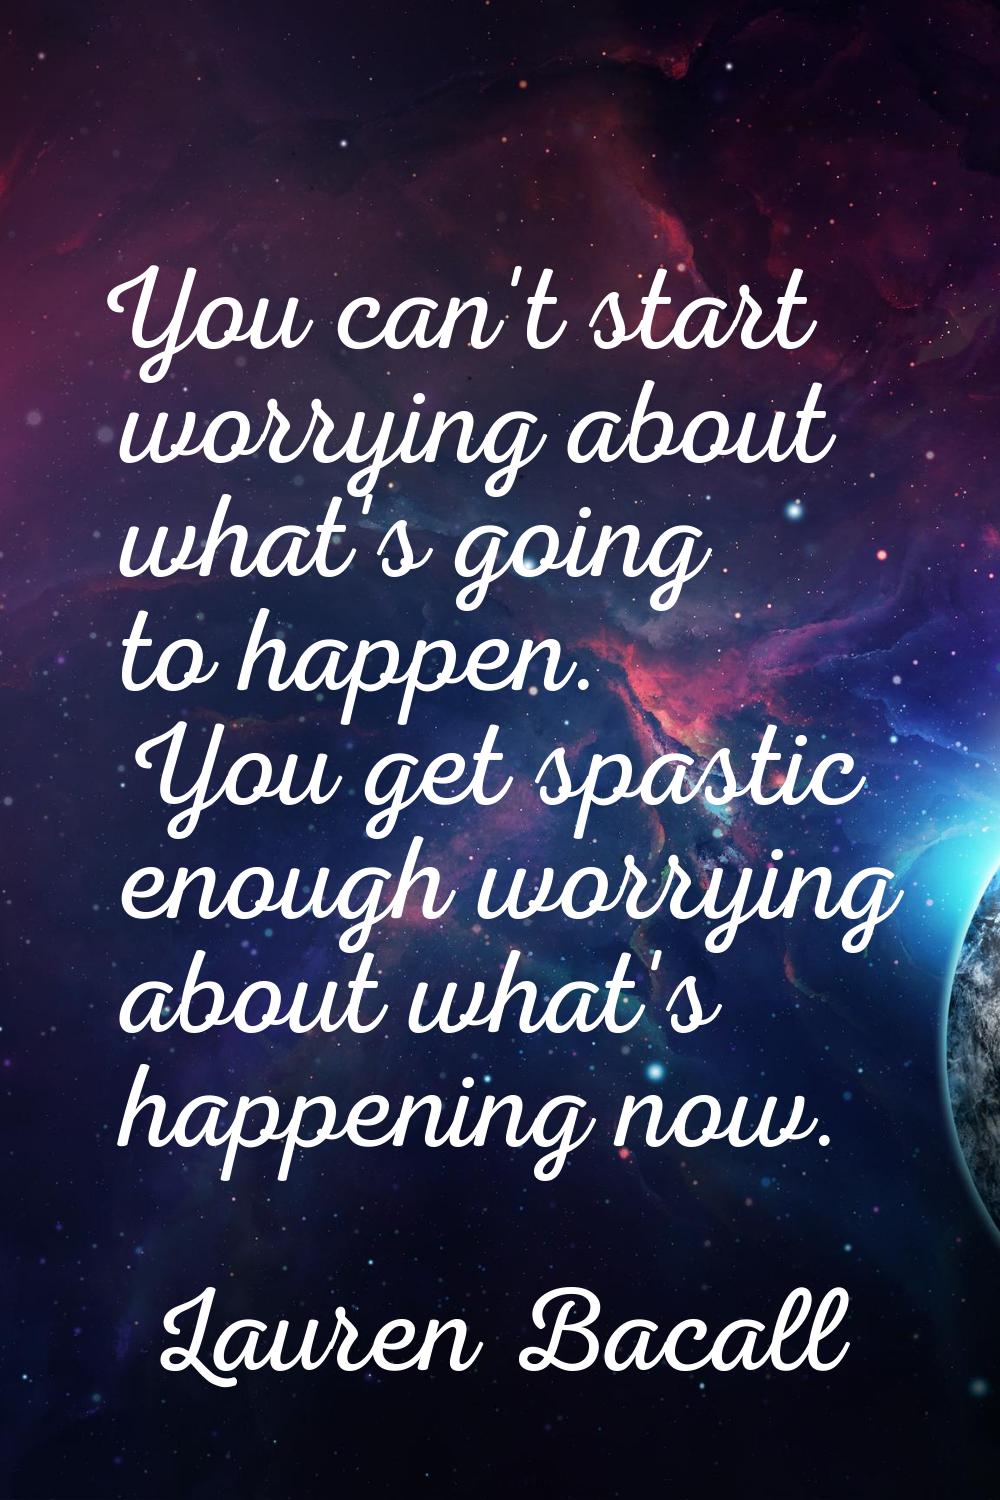 You can't start worrying about what's going to happen. You get spastic enough worrying about what's